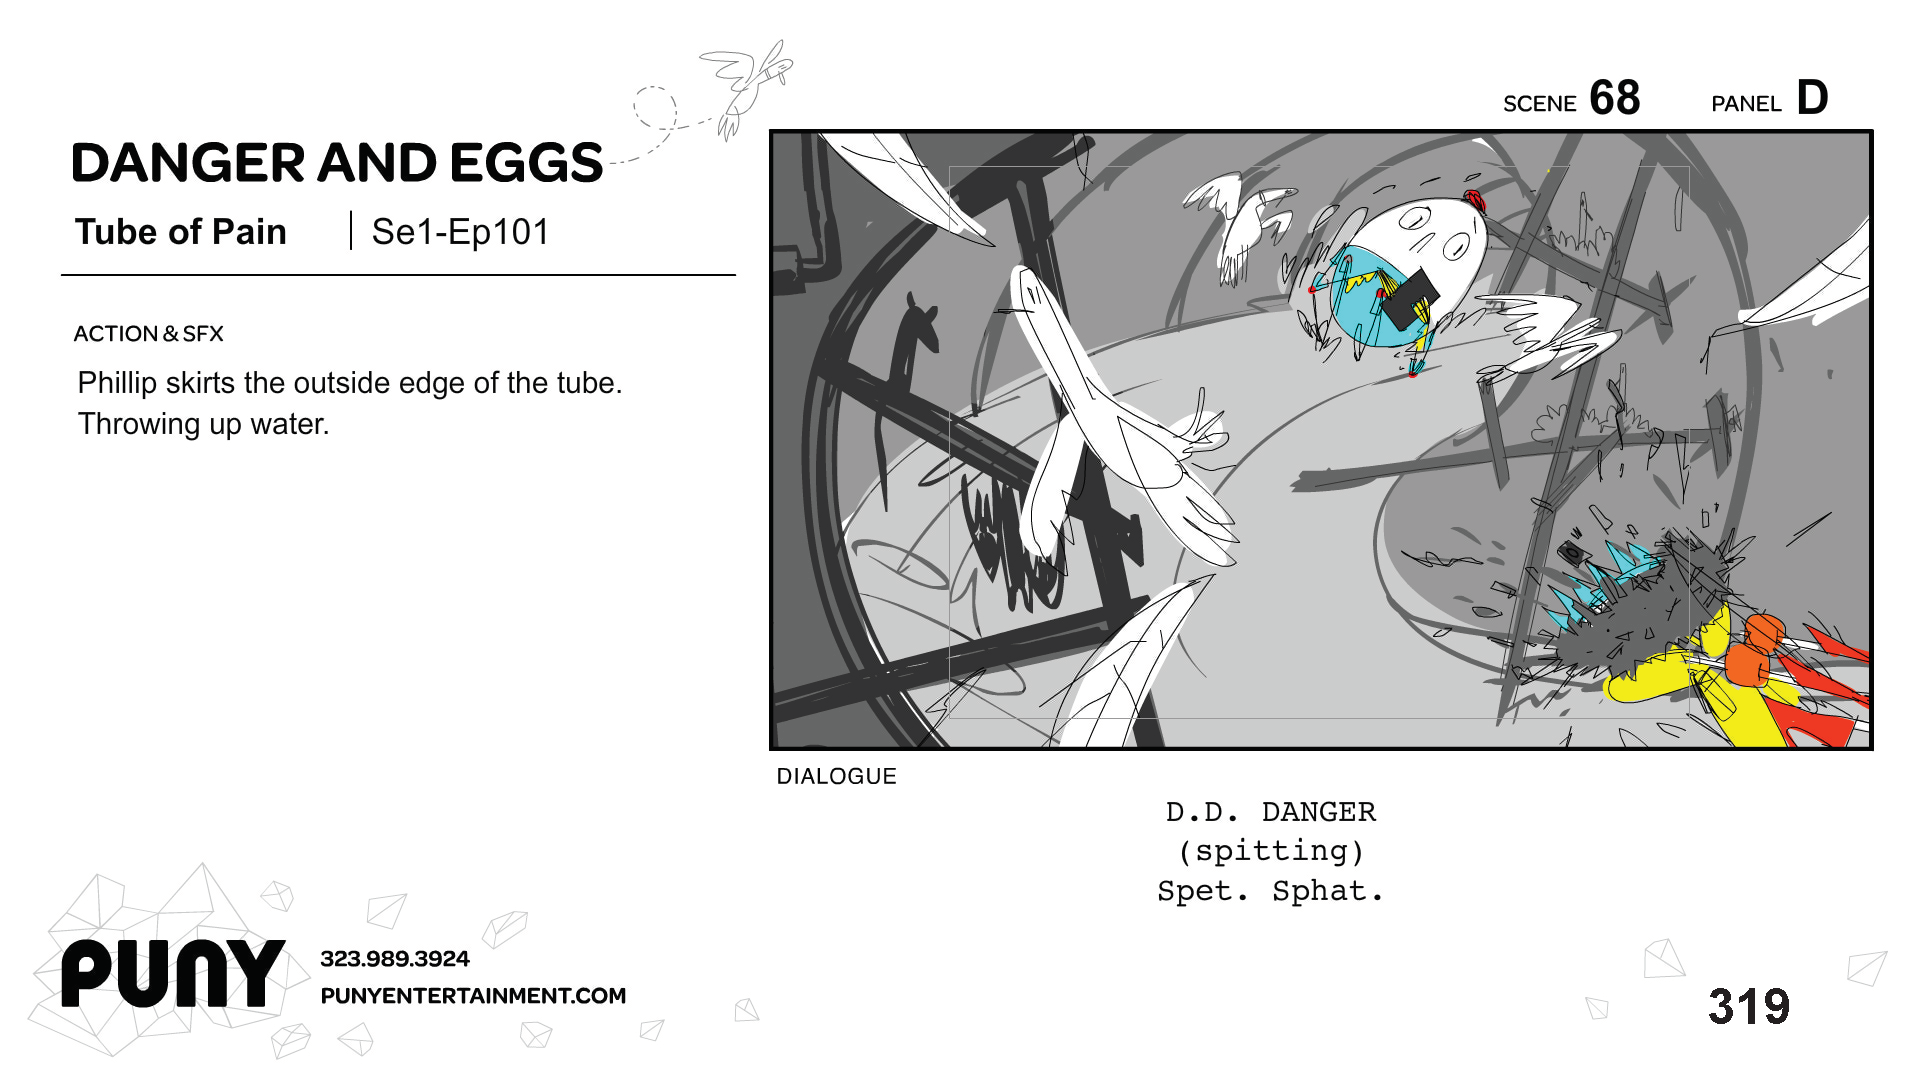 MikeOwens_STORYBOARDS_DangerAndEggs_Page_214.png